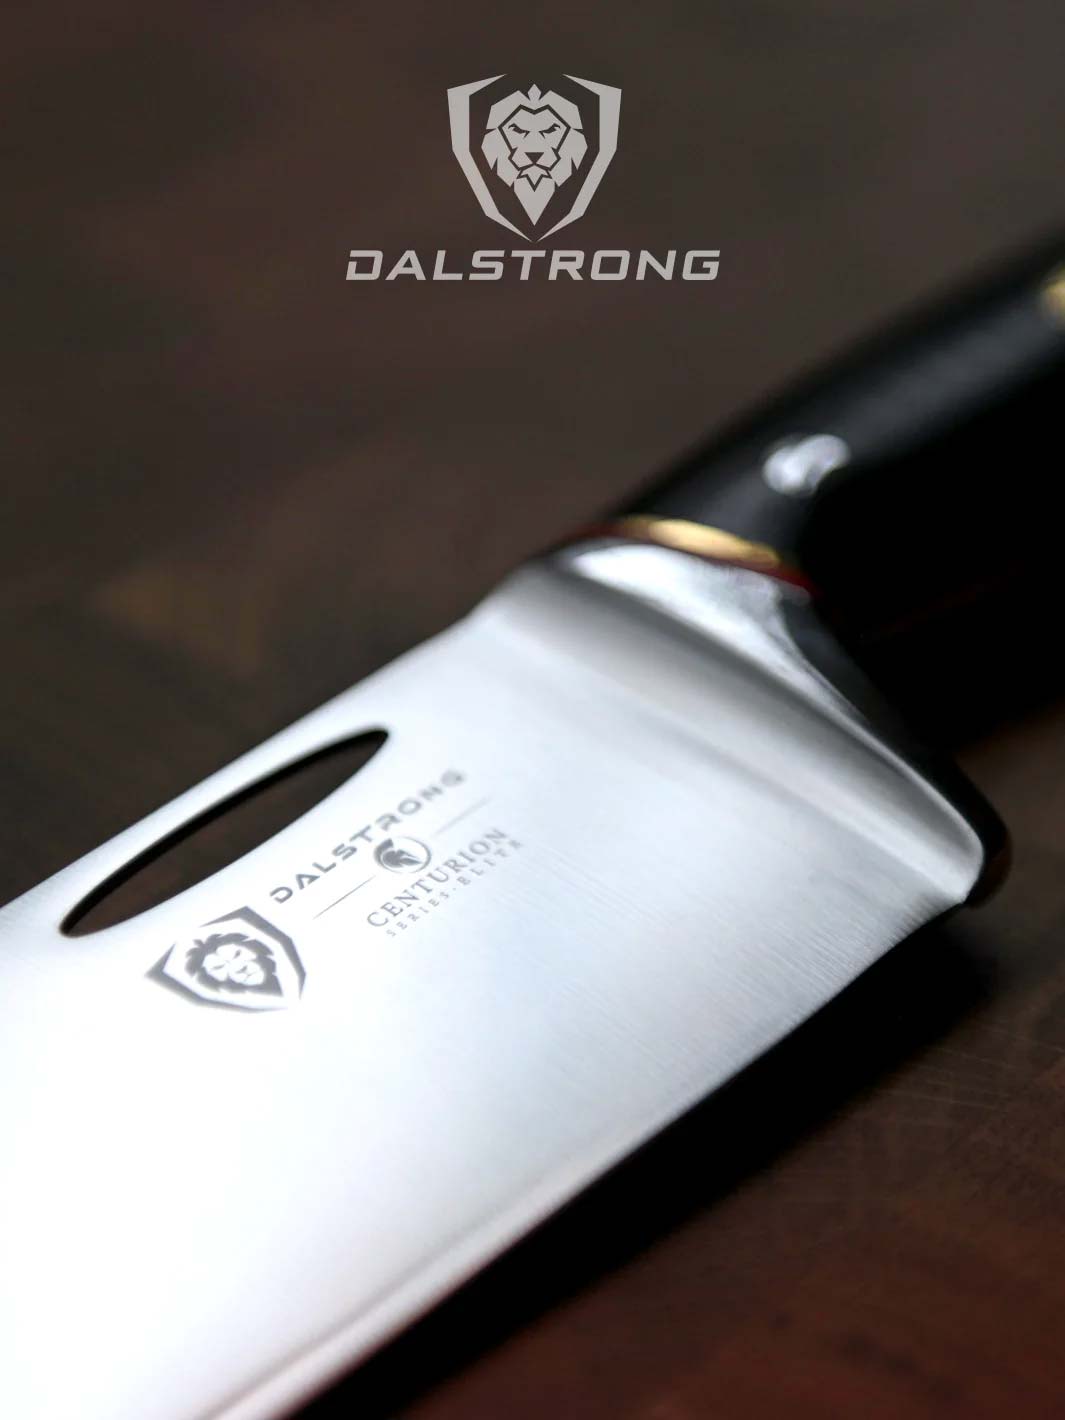 Dalstrong centurion series 10 inch chef knife with black handle showcasing the dalstrong logo in the blade.